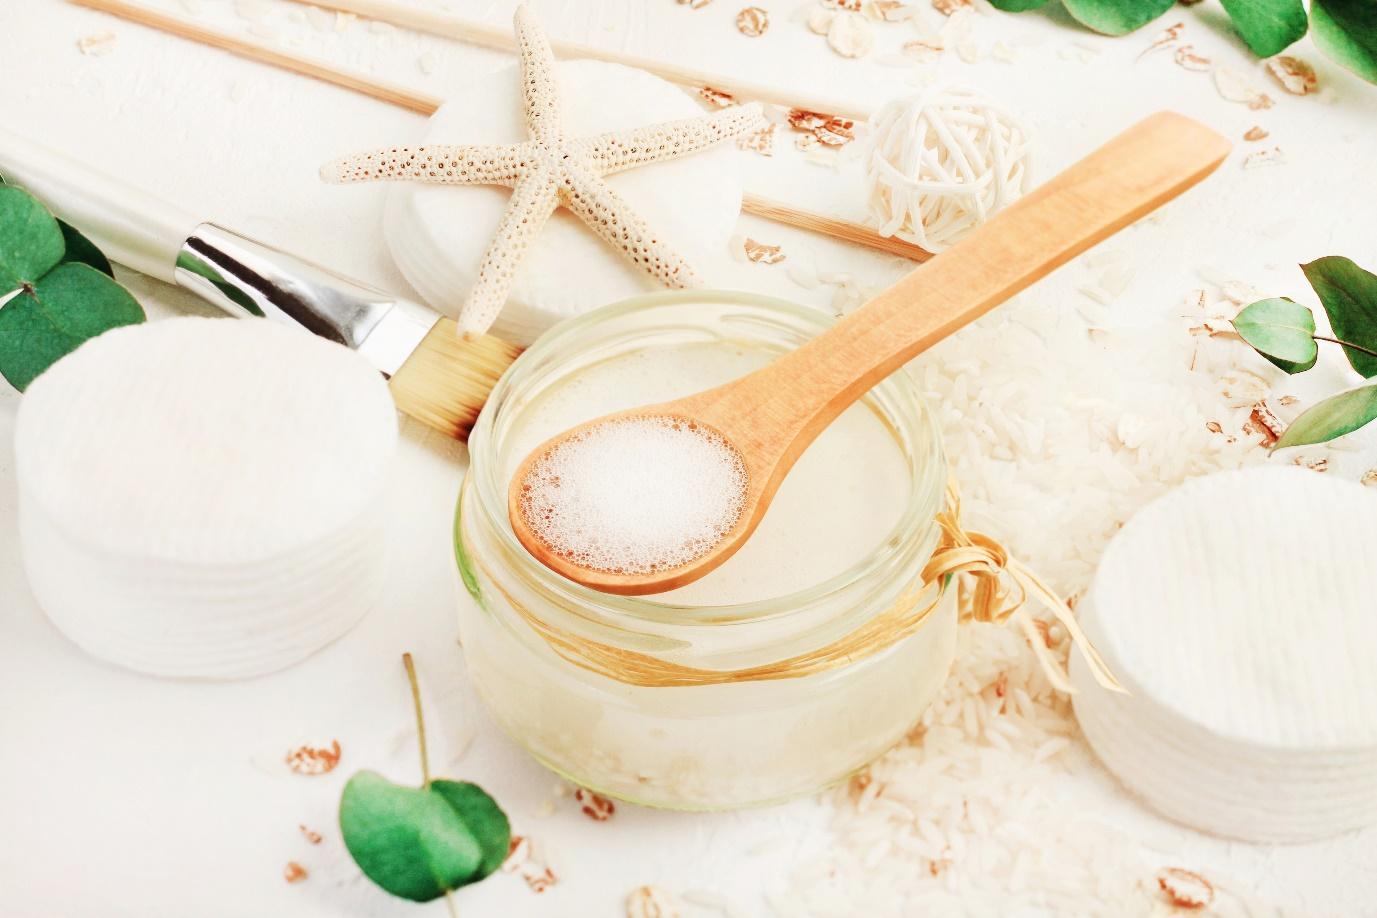 South Asian Skincare Remedies: Using Rice Water for Skincare Regimens